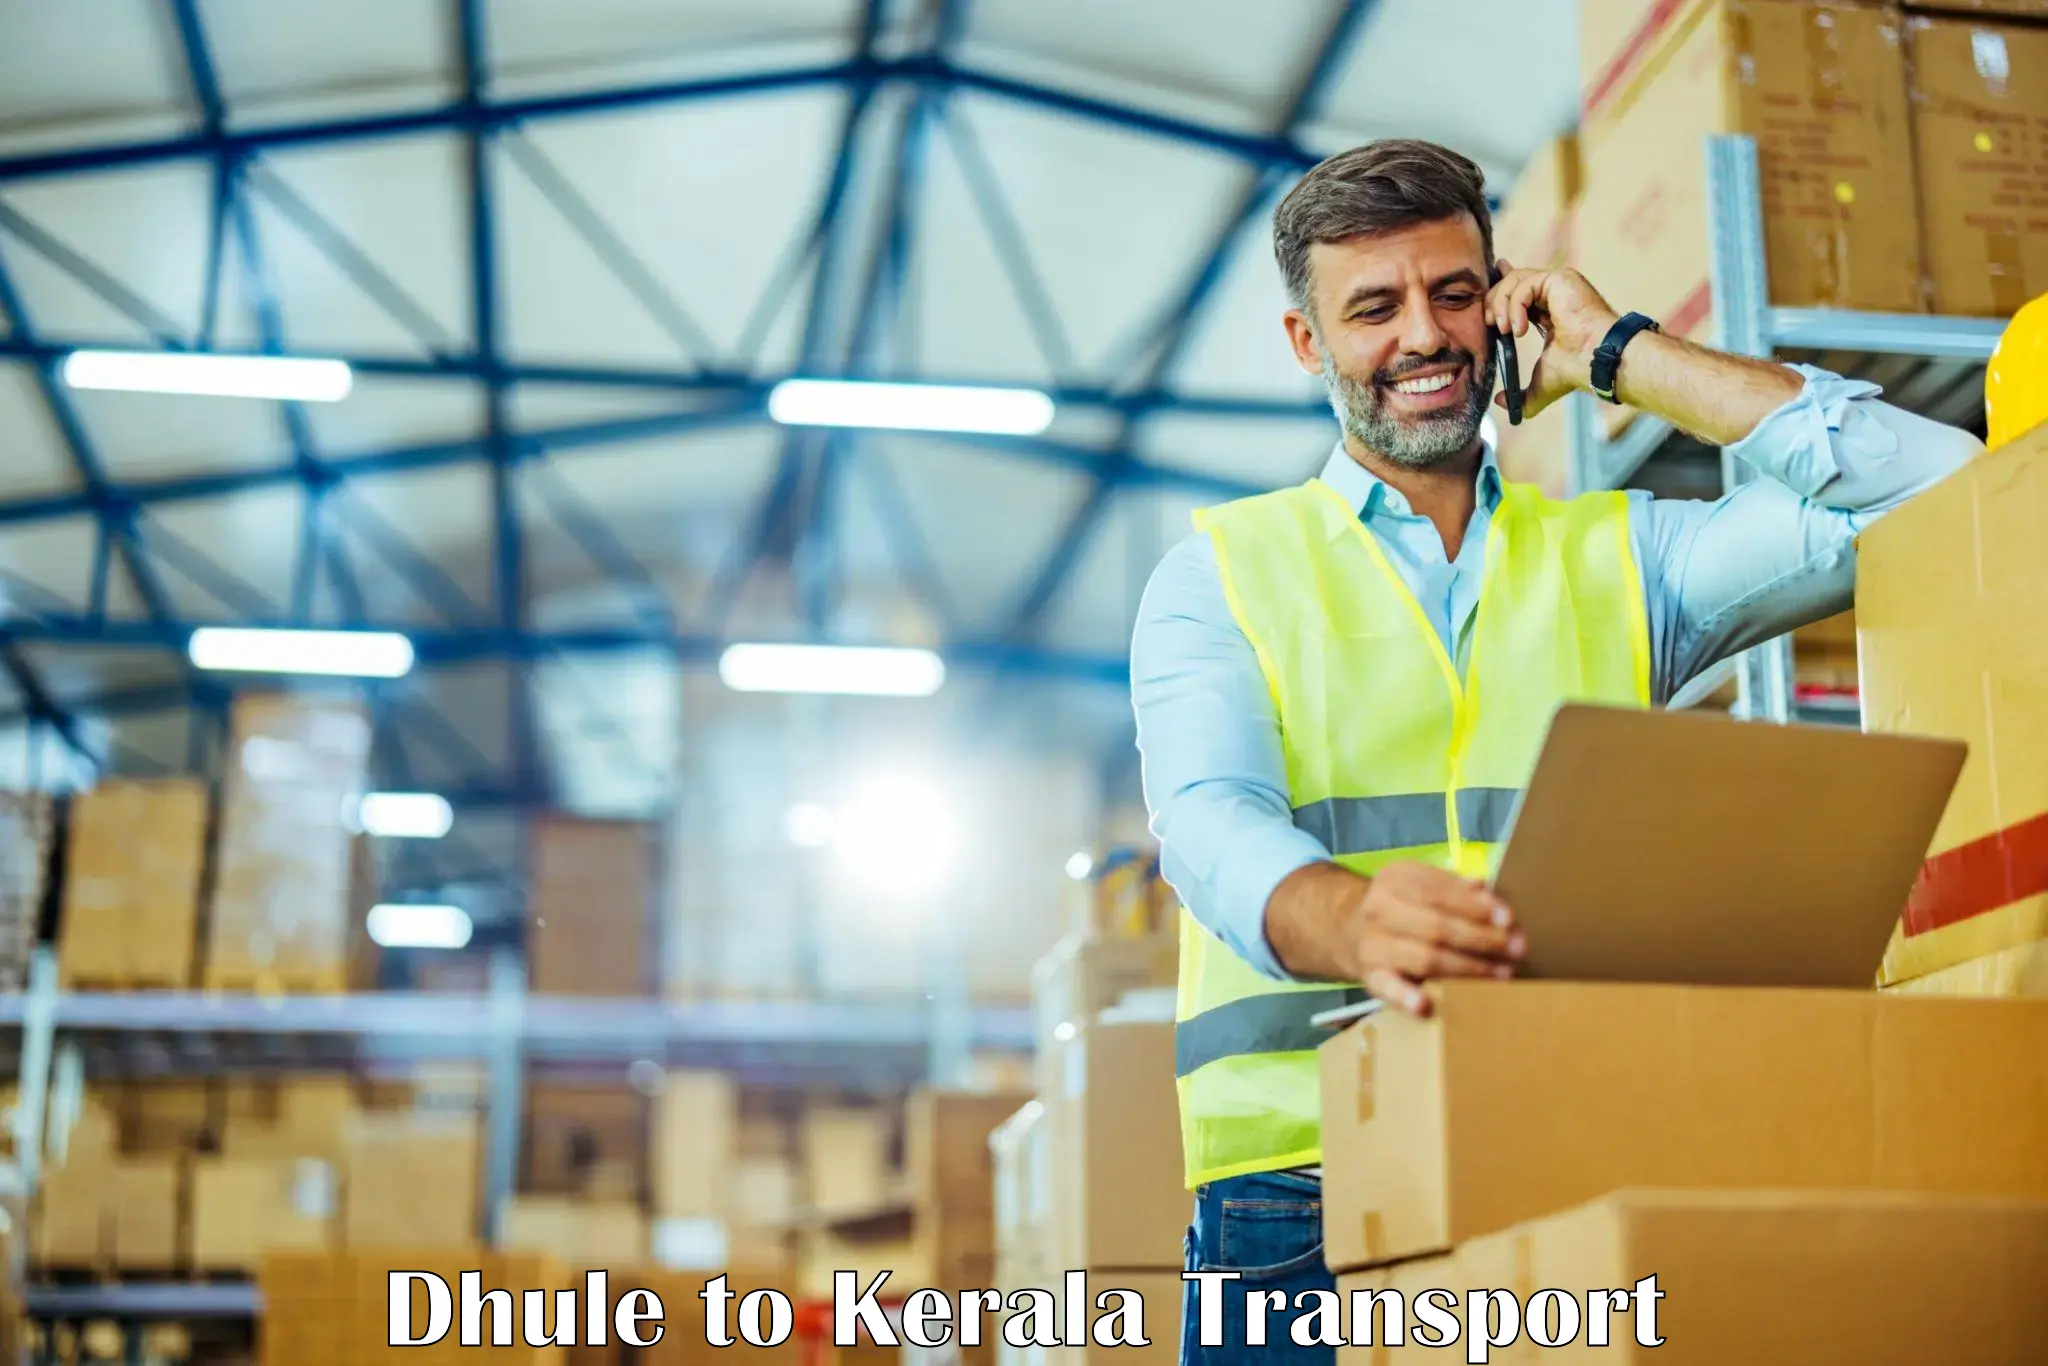 Transport in sharing Dhule to Kozhencherry